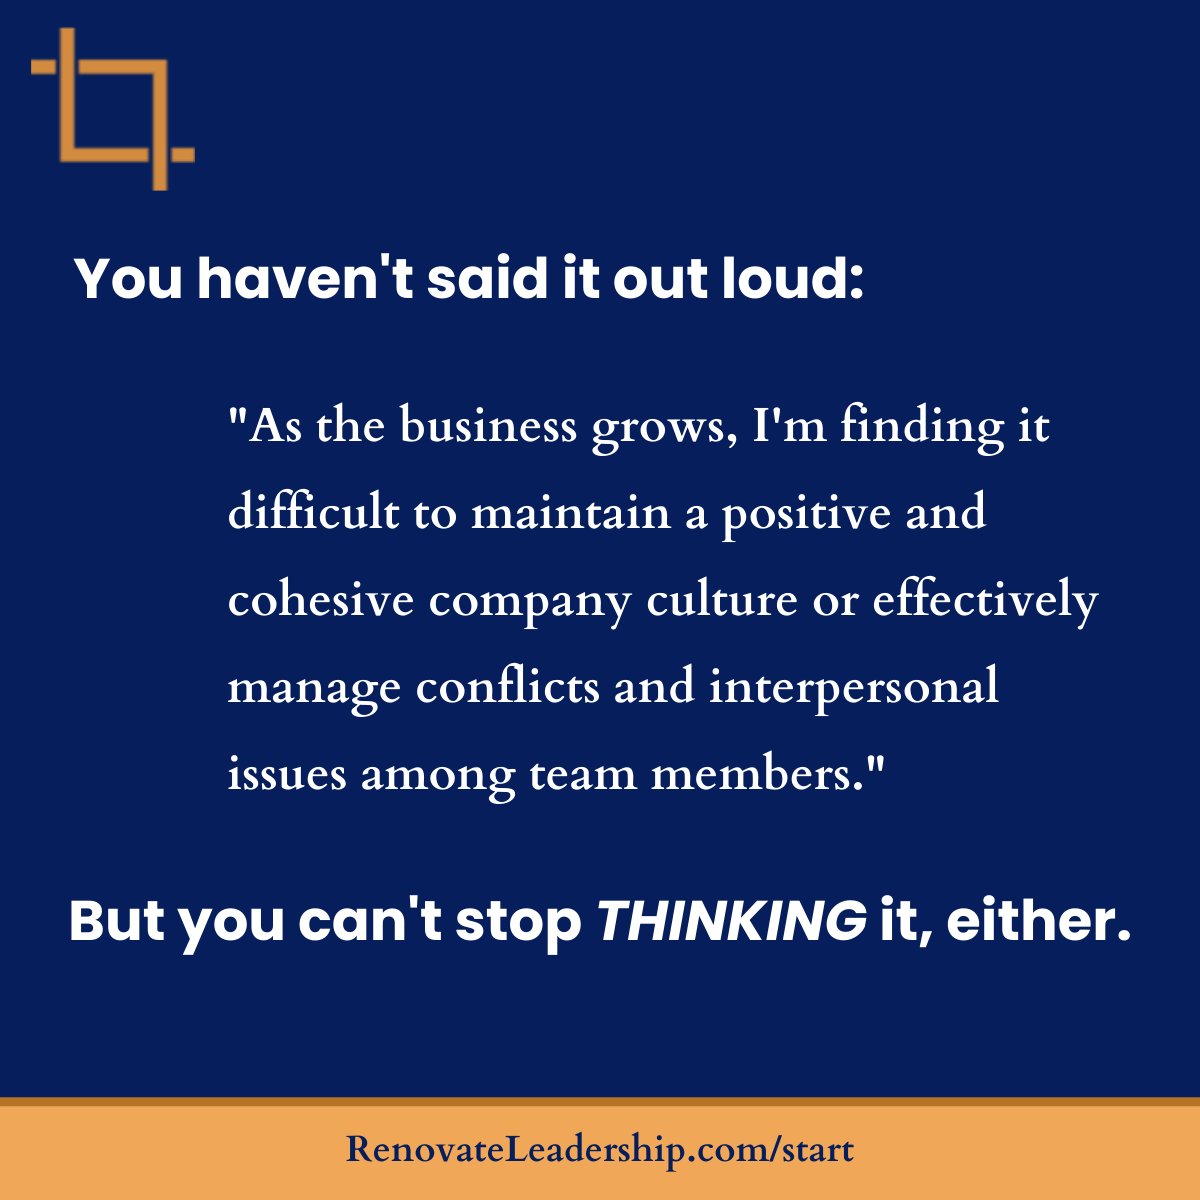 Struggling to maintain company culture? 🌟 Discover how to foster a positive environment and effectively manage team conflicts. Build a thriving culture! #PositiveWorkCulture #RenovateLeadership #SystemAndSoul